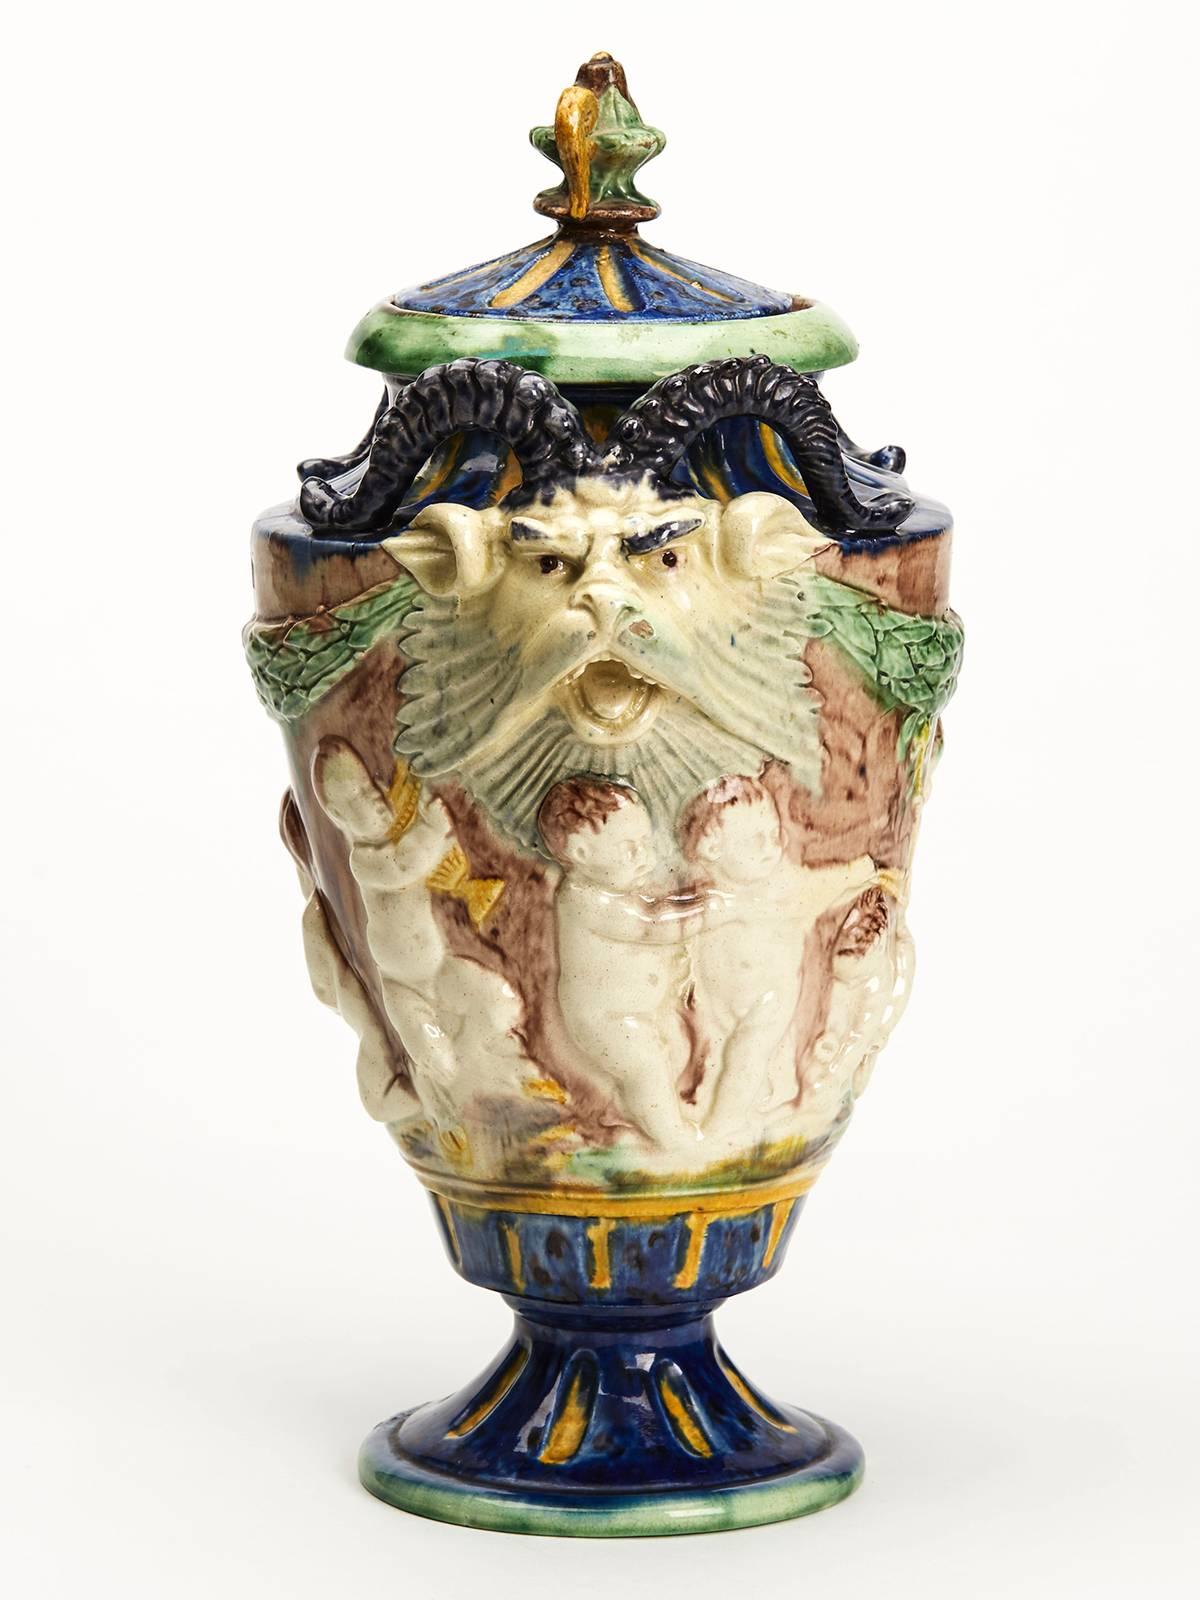 An antique Majolica lidded vase moulded with a continuous relief moulded scene of putti in various activity with grotesque horned lion heads applied either side of the rim. The earthenware vase stands on a rounded pedestal foot with a rounded raised